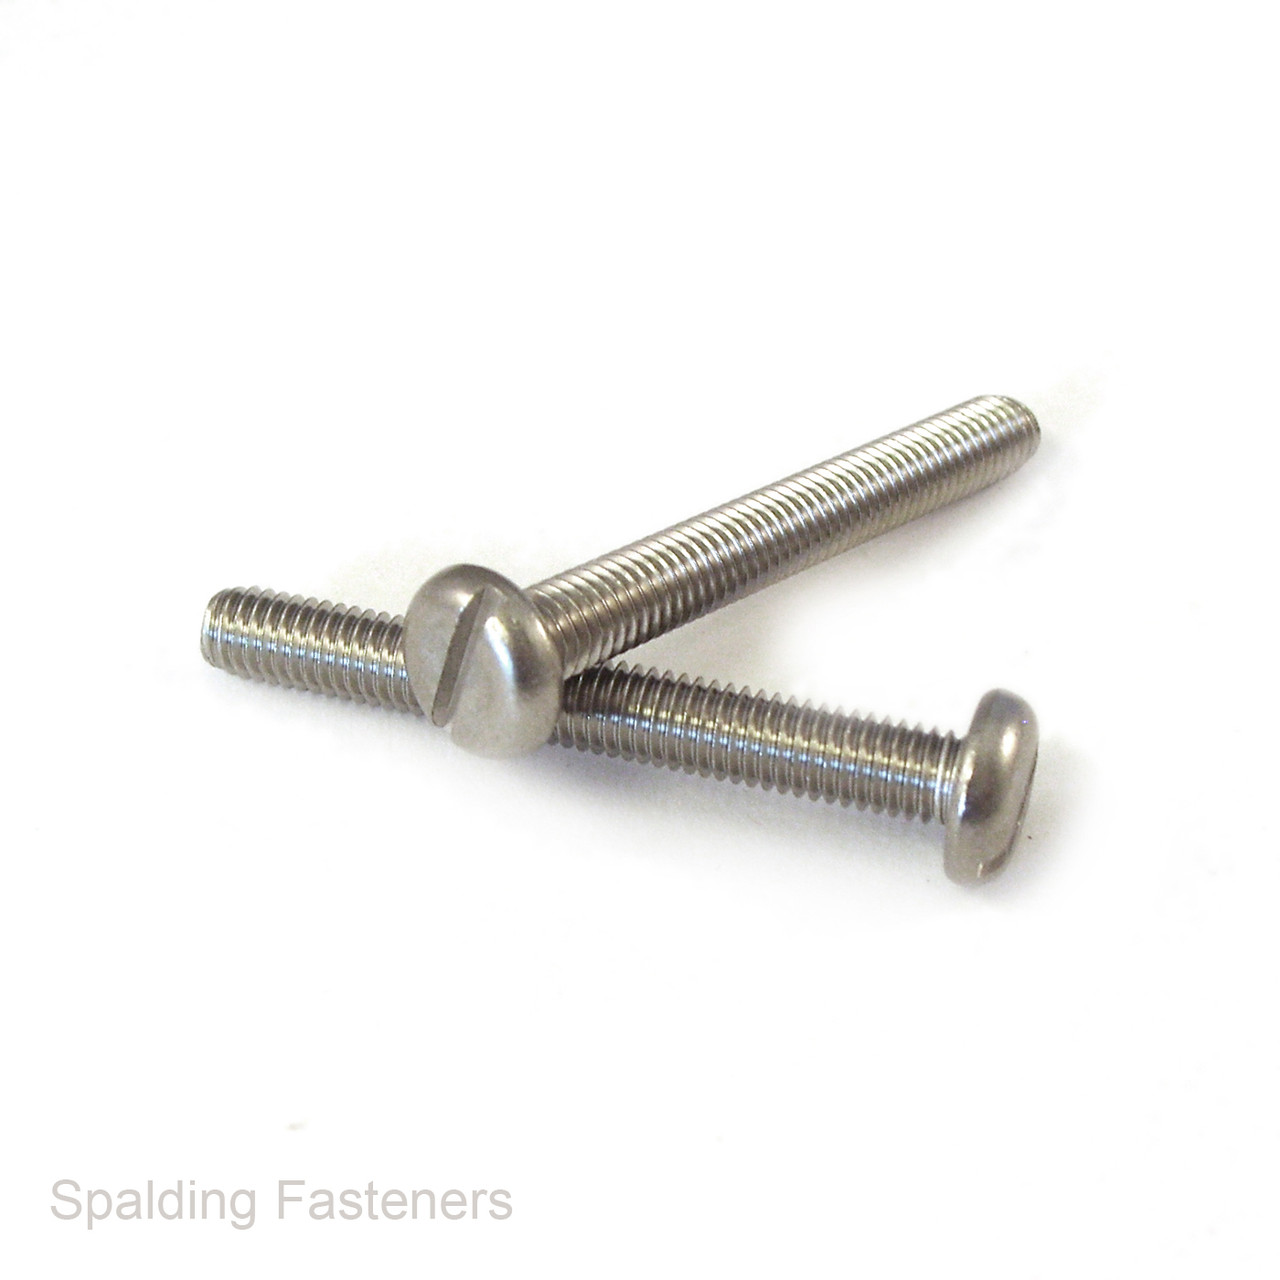 6 - 32 UNC A2 Stainless Steel Pan Slotted Head Machine Screws